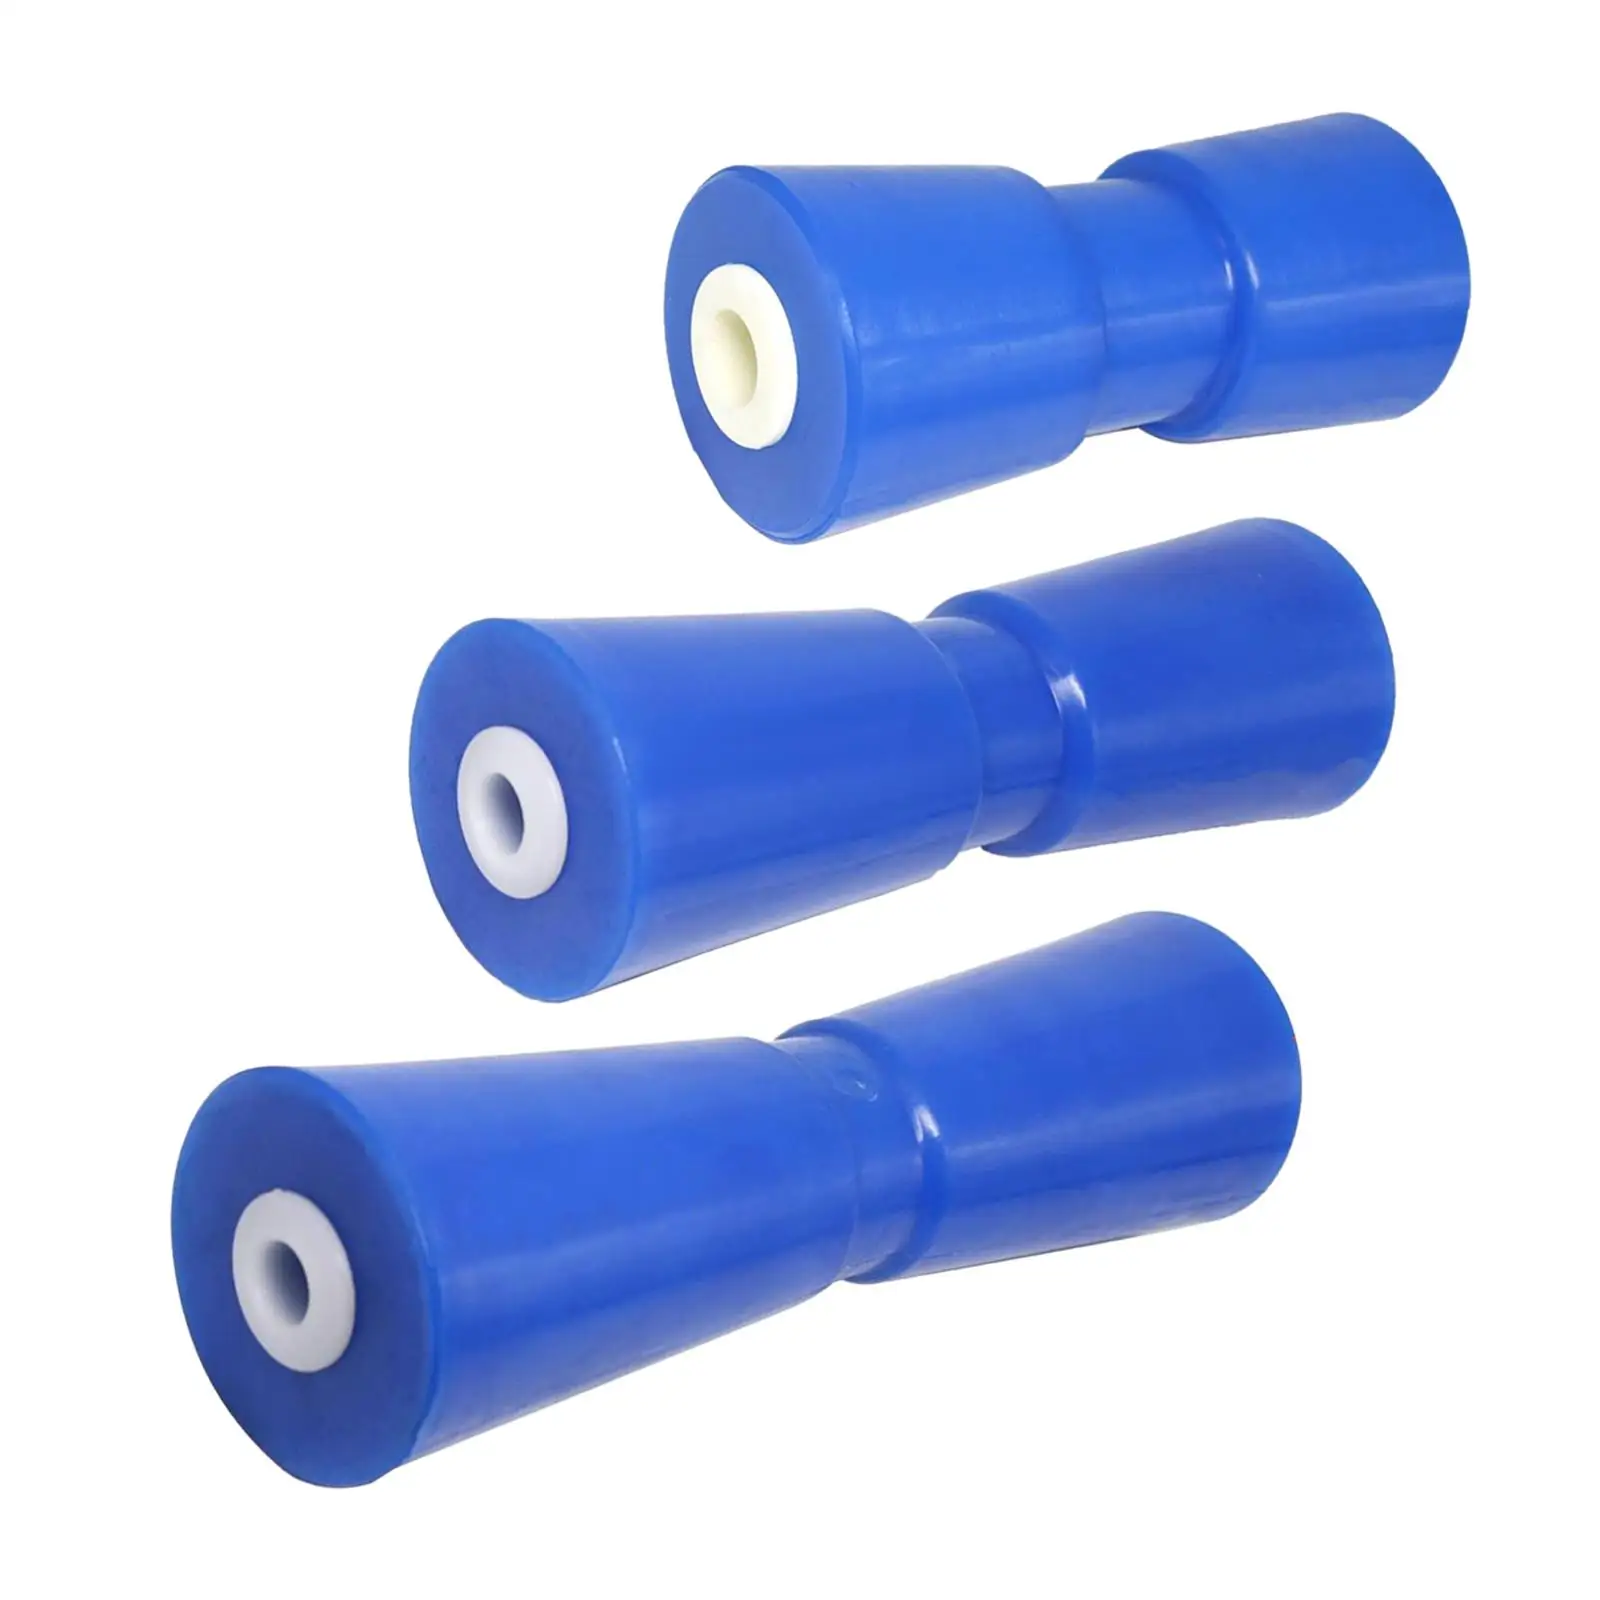 Boat Trailer Roller Bow Roll Smoothly Blue Rolling Tool Heavy Duty for Ship Motorboat Boats Fittings Direct Replaces